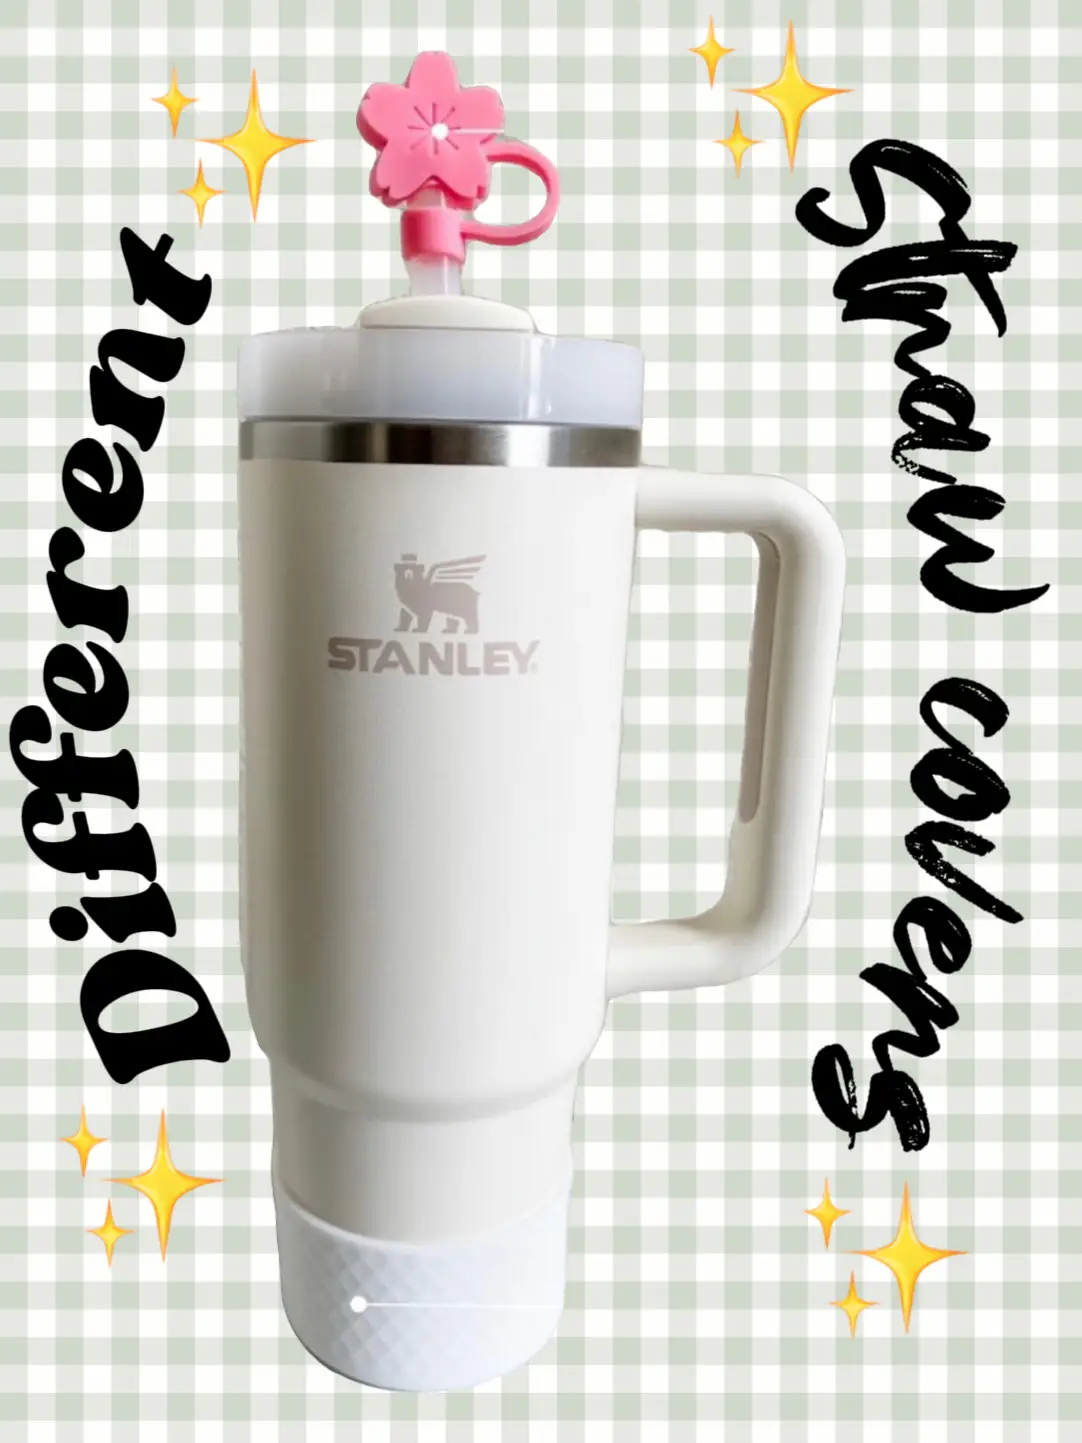 How cute! Stanley Christmas straw covers! #stanleycup #stanleytumbler